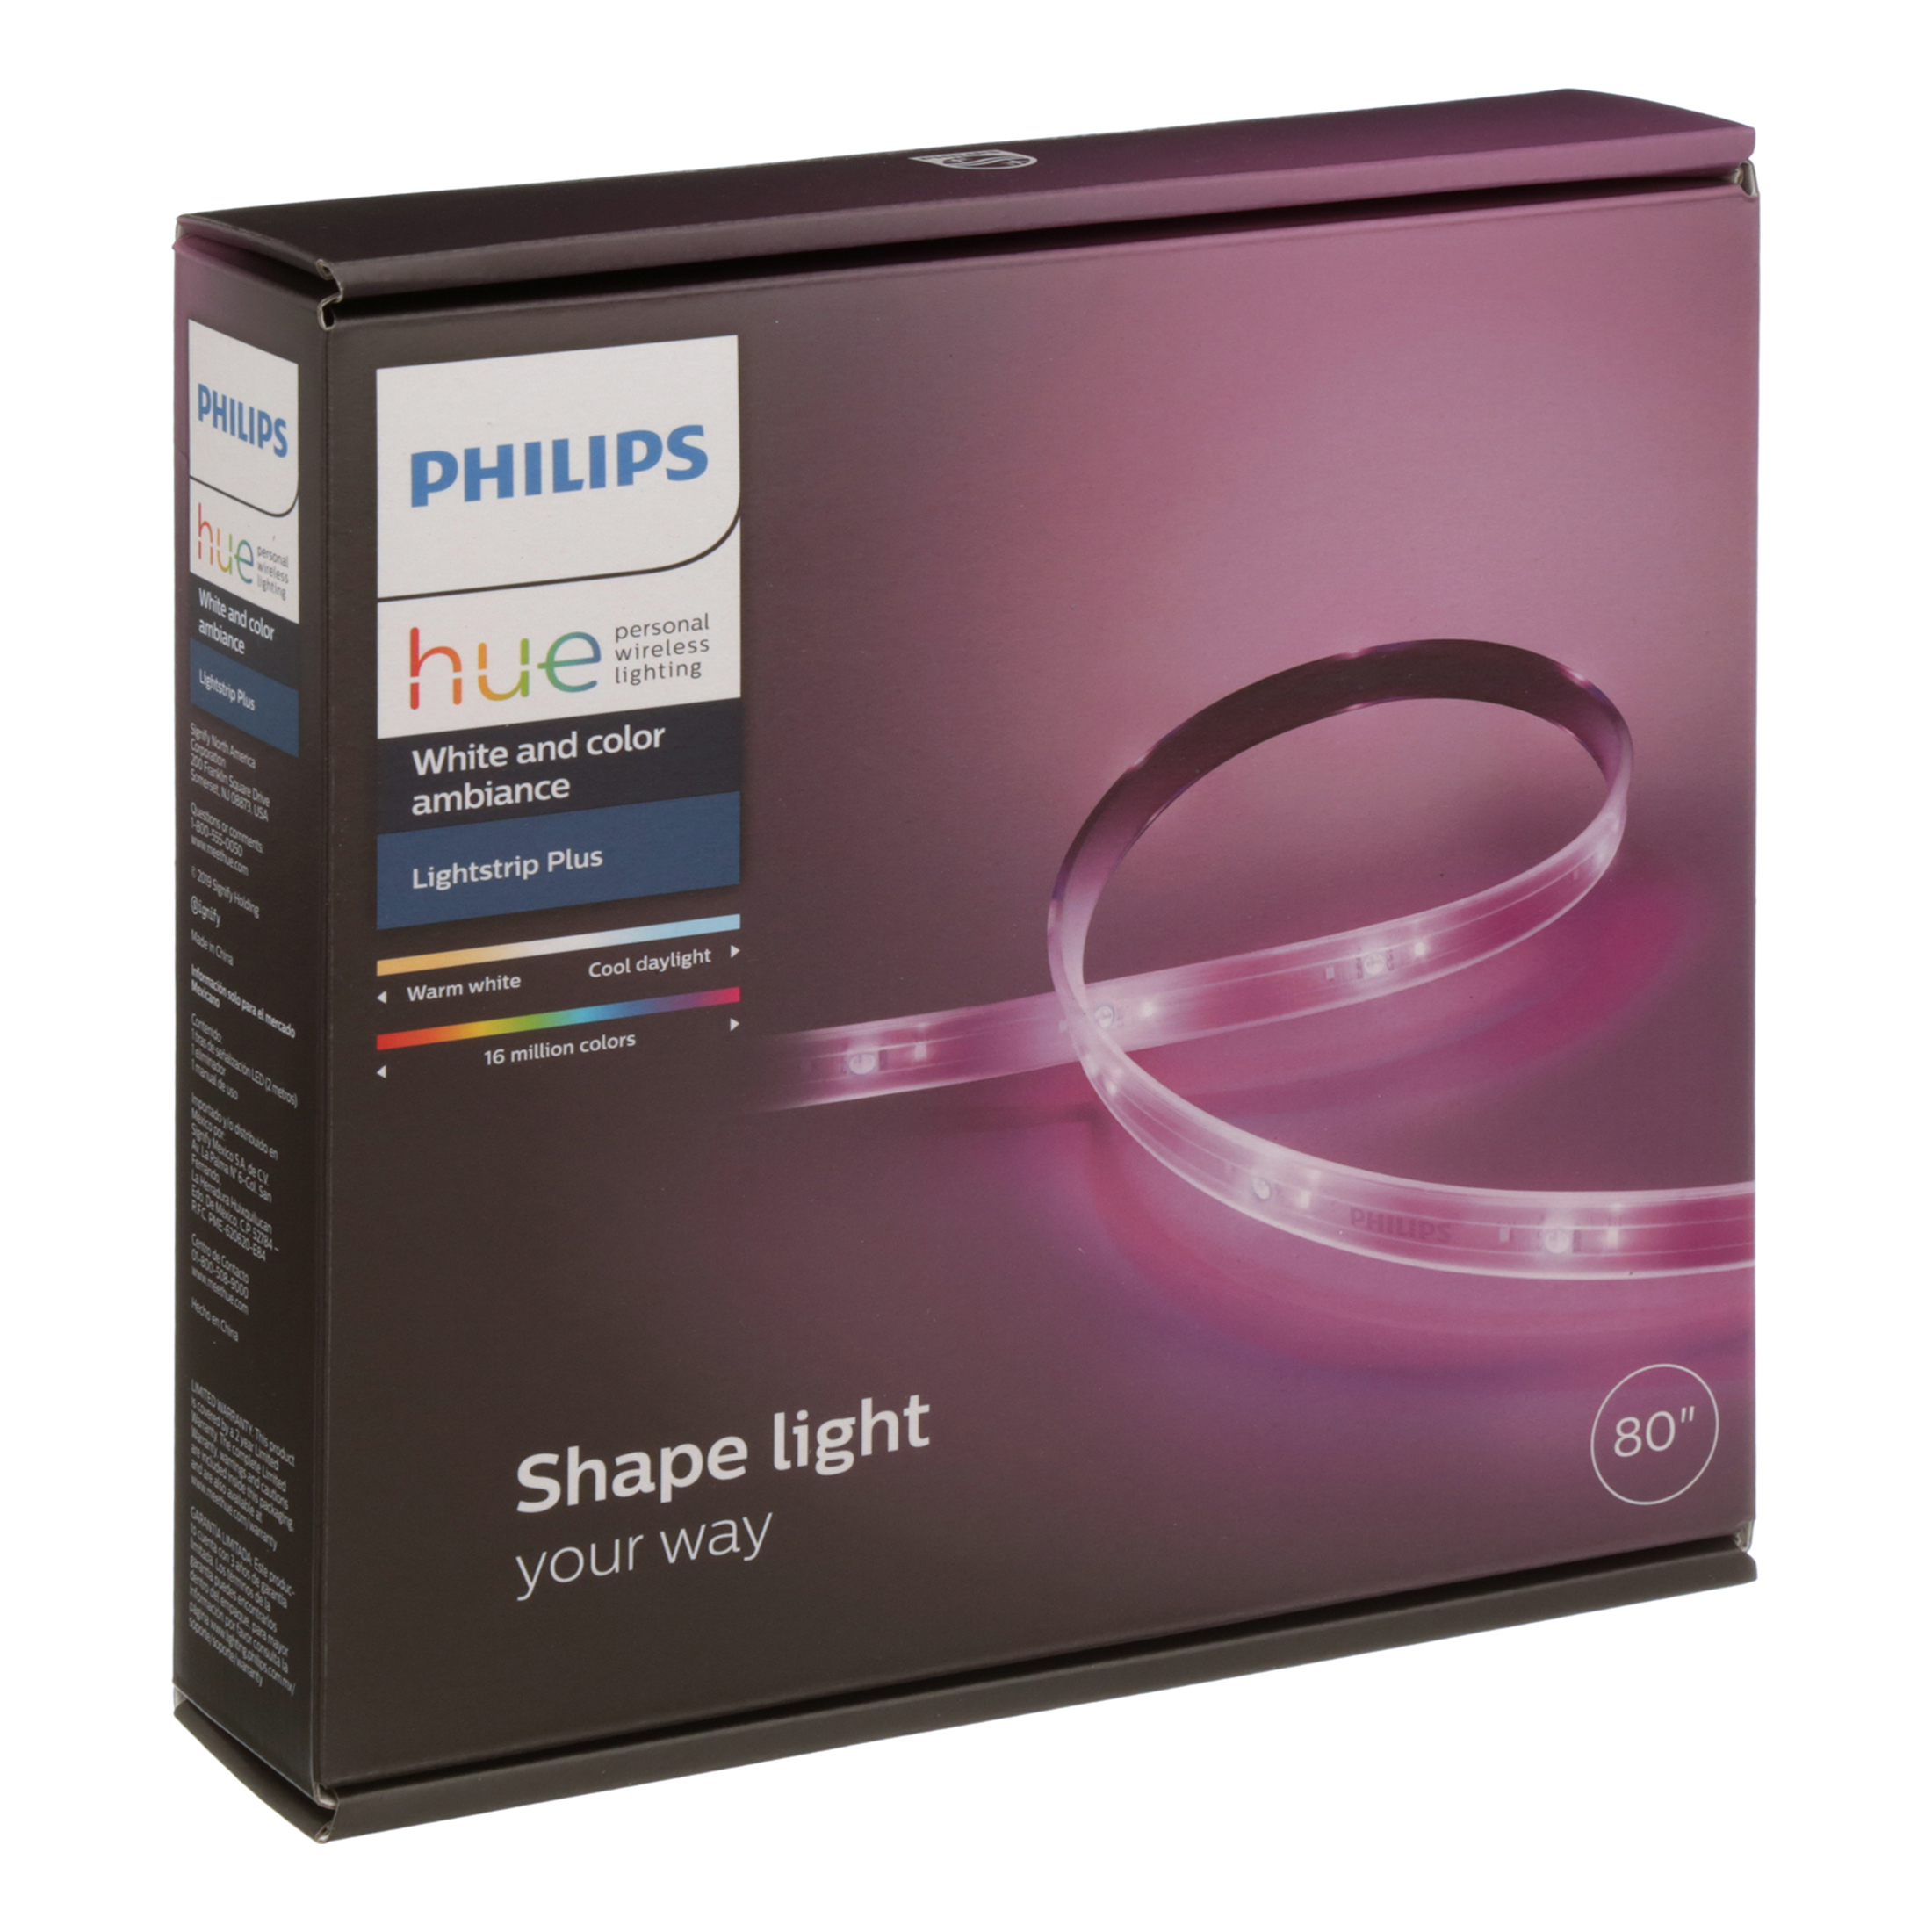 Philips Hue White and Color Ambiance Smart Lightstrip Plus 2m $59.99